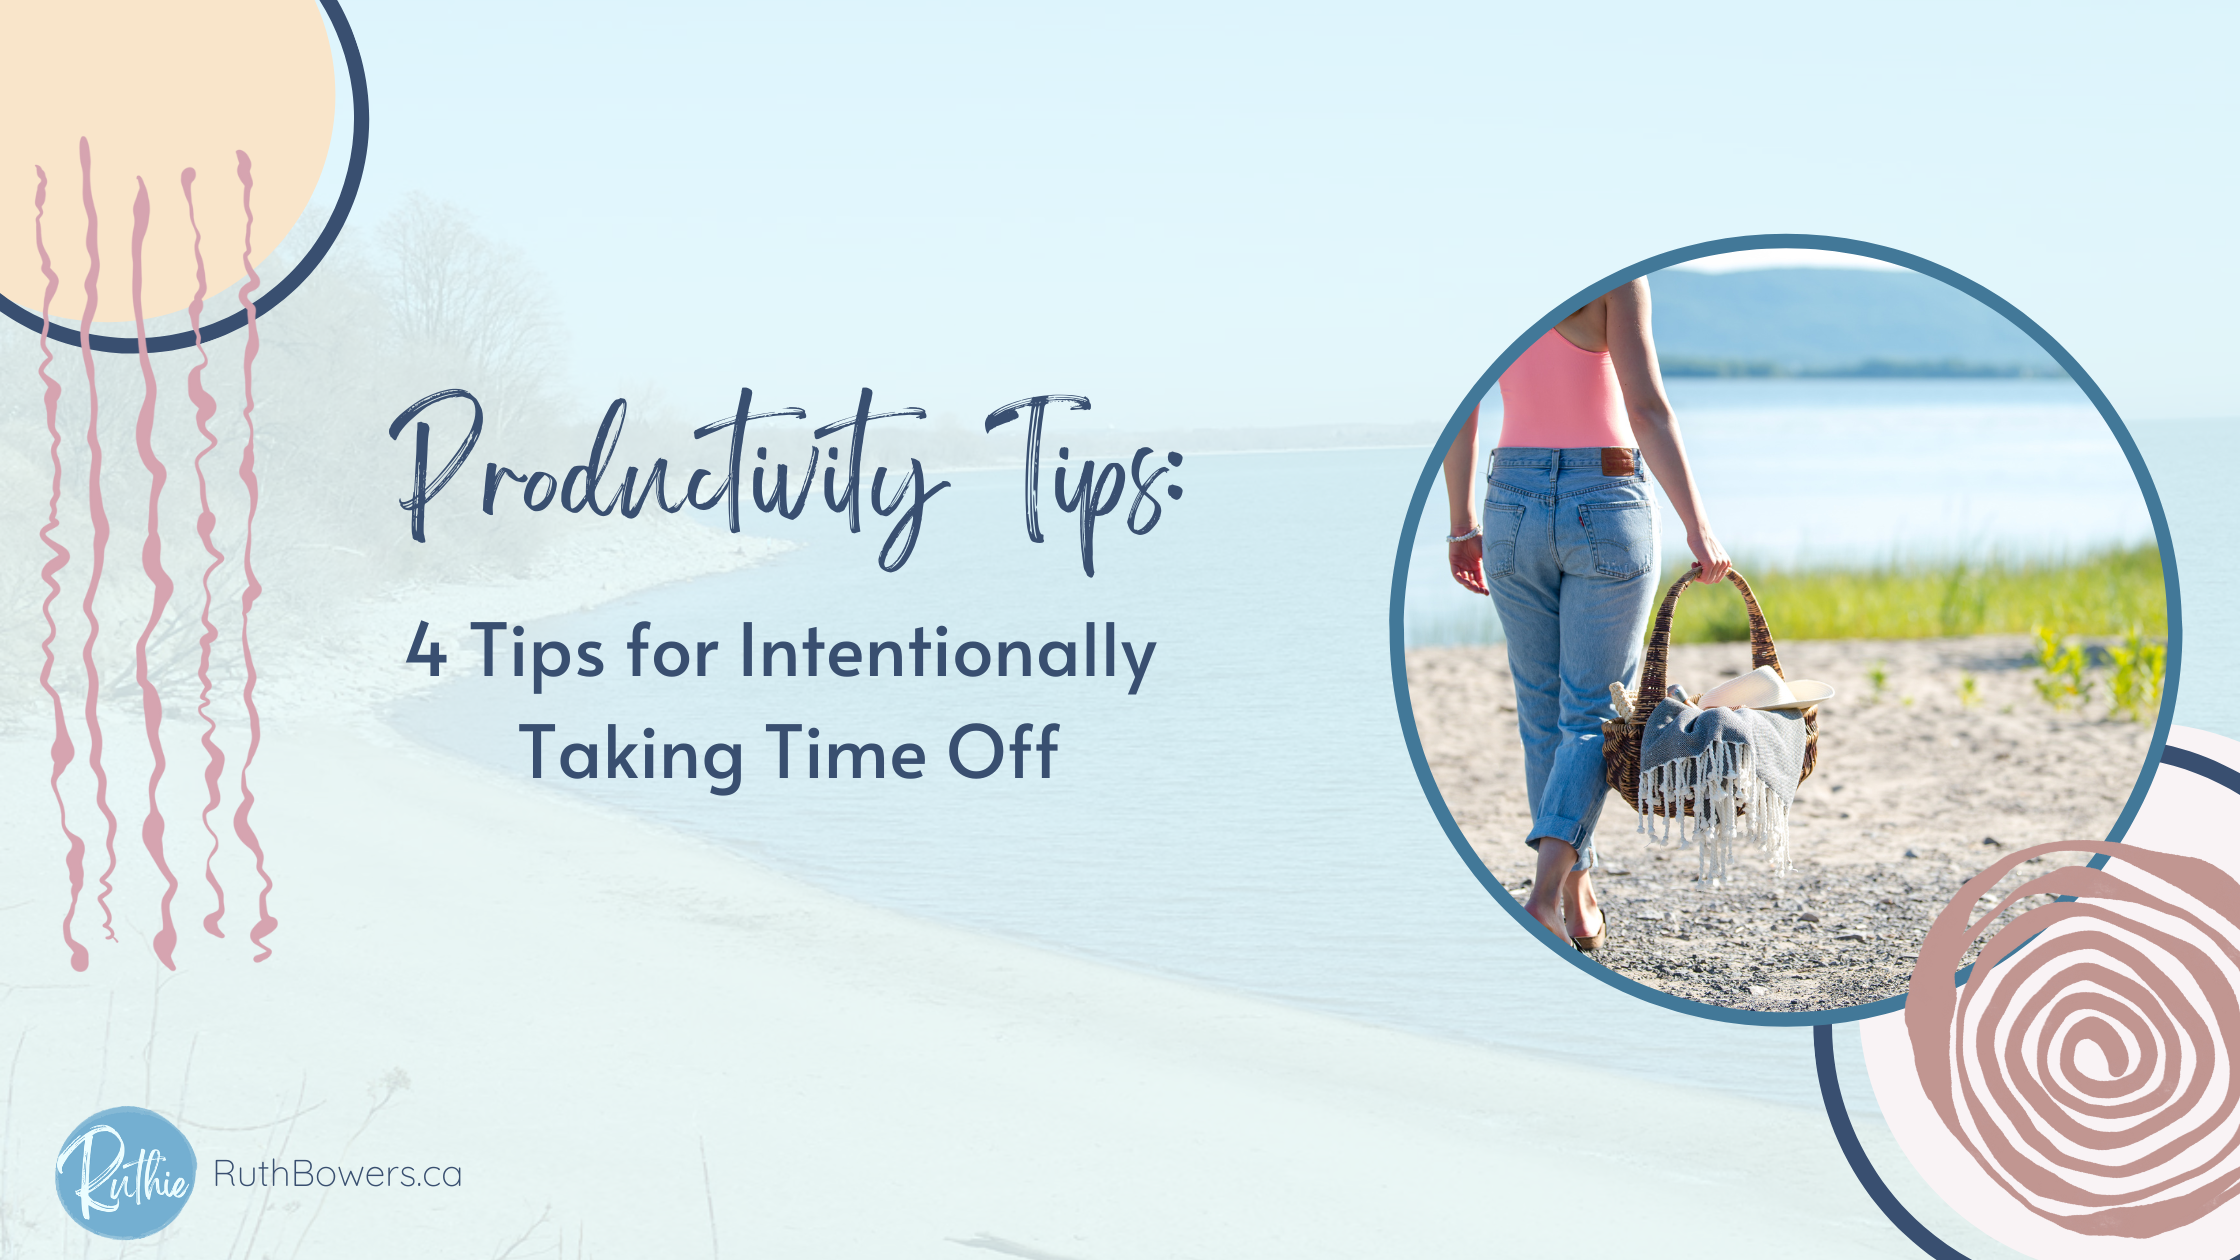 4 tips for intentionally taking time off